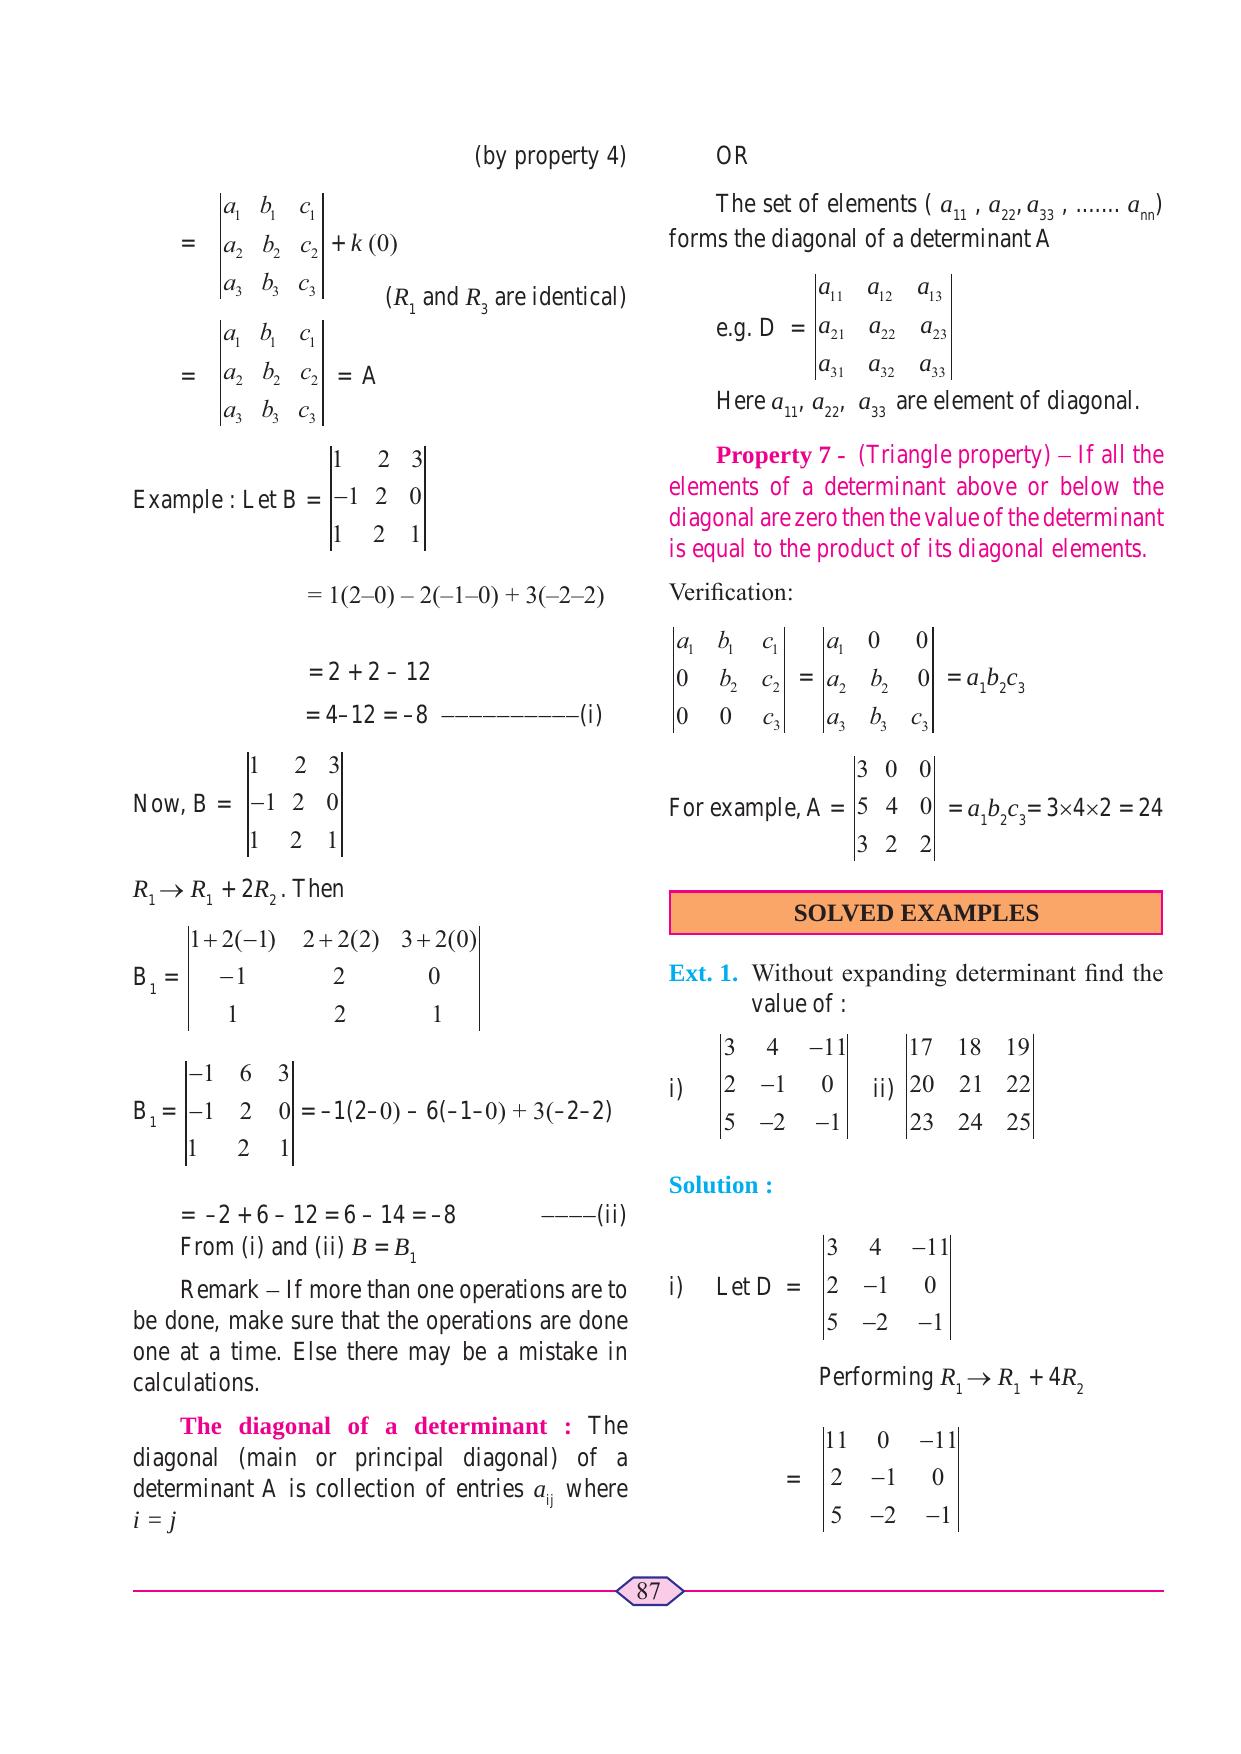 Maharashtra Board Class 11 Maths (Commerce) (Part 1) Textbook - Page 97